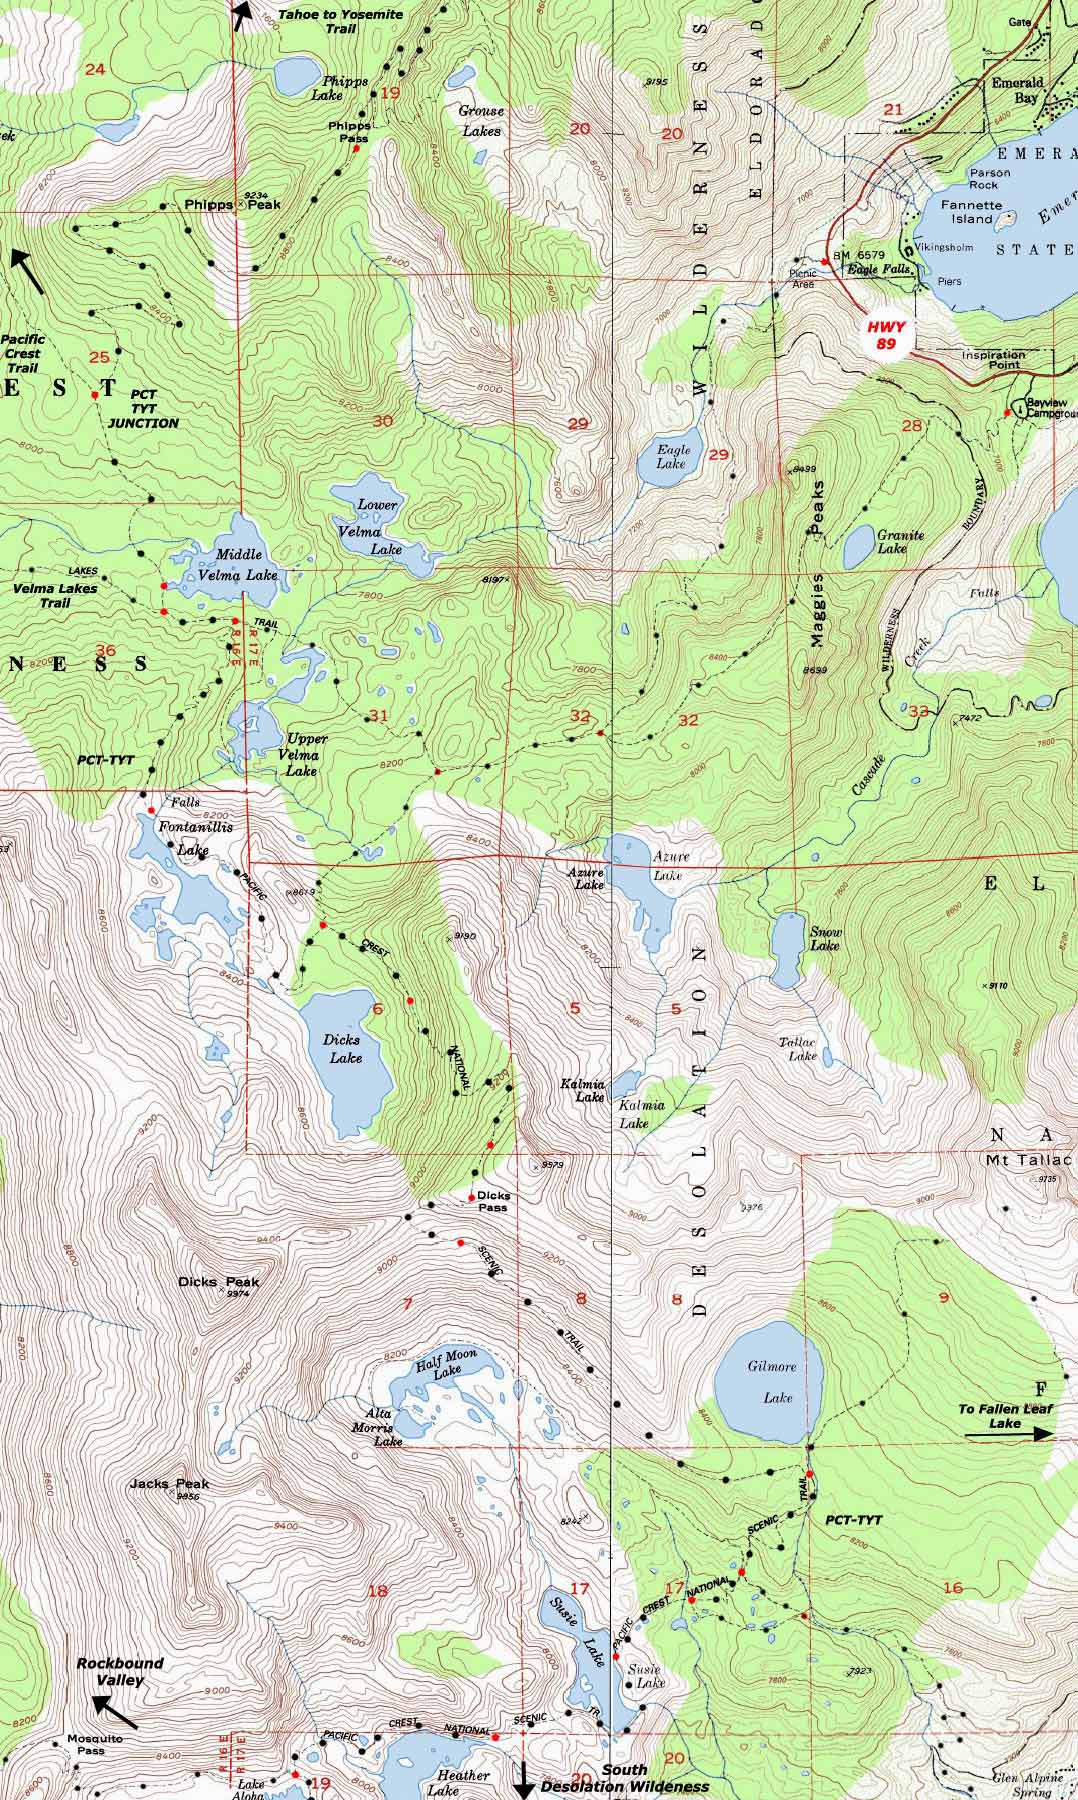 Phipps Pass to Lake Aloha topo hiking map of the Desolation Wilderness Pacific Crest and Tahoe to Yosemite Trails.